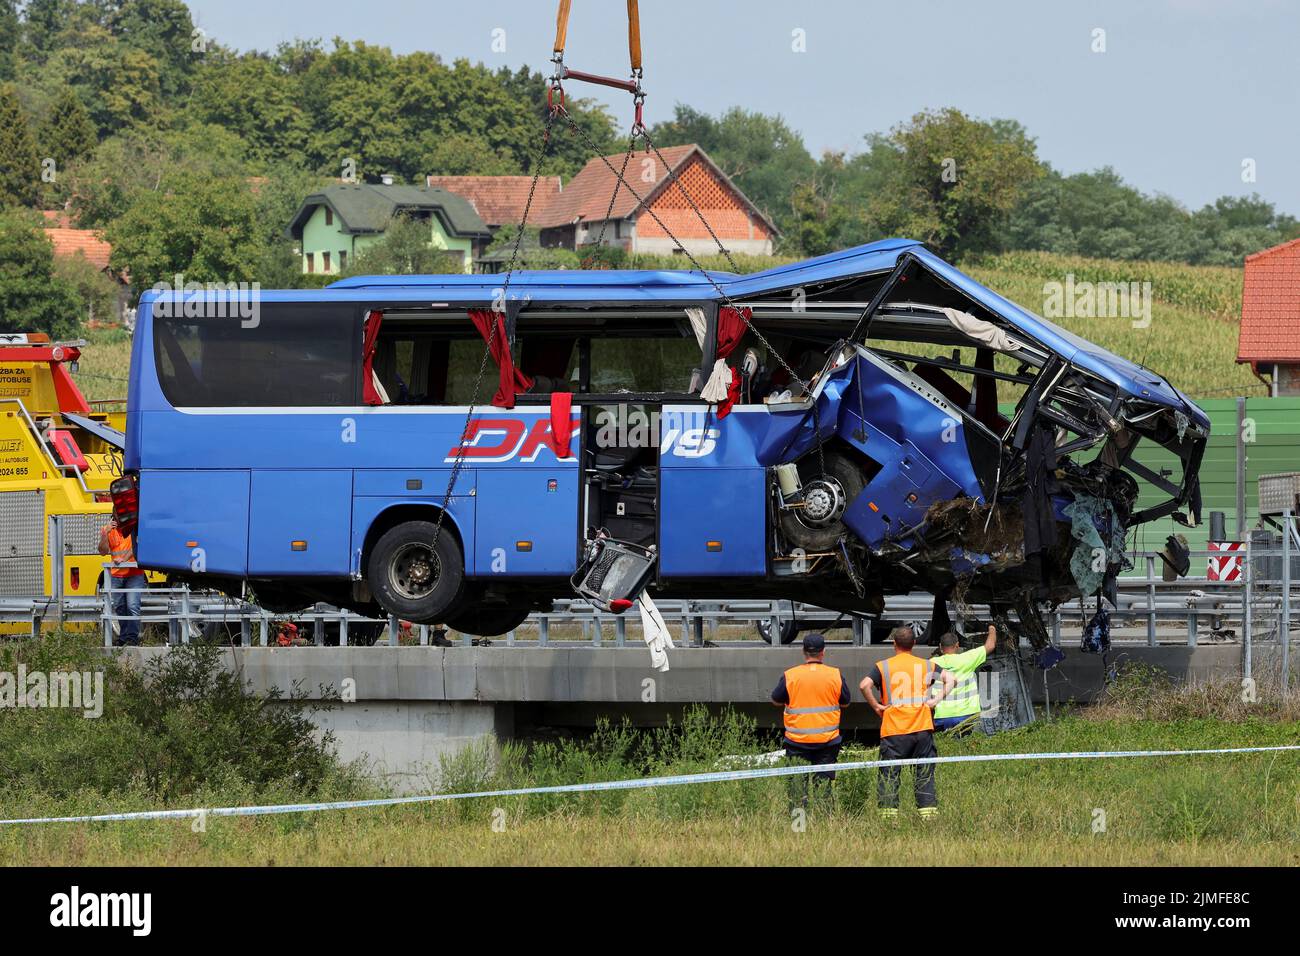 A crane removes the bus with Polish licence plates that slipped off a road, from the scene near Varazdin, northwestern Croatia, August 6, 2022. REUTERS/Antonio Bronic Stock Photo